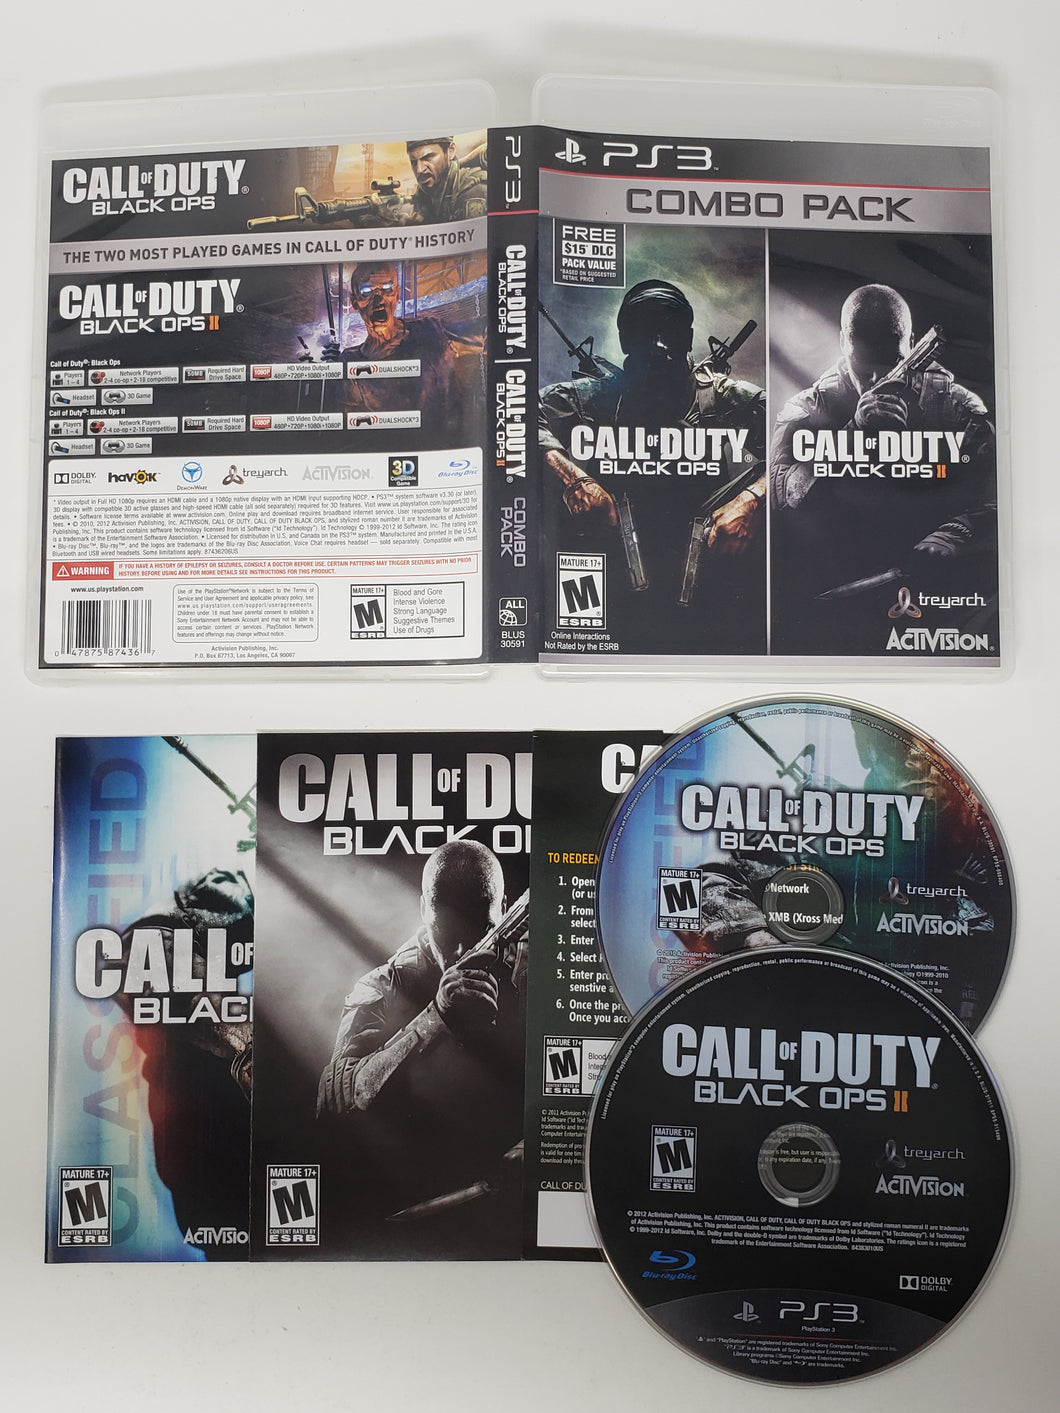 Call of Duty Black Ops I and II Combo Pack - Sony Playstation 3 | PS3